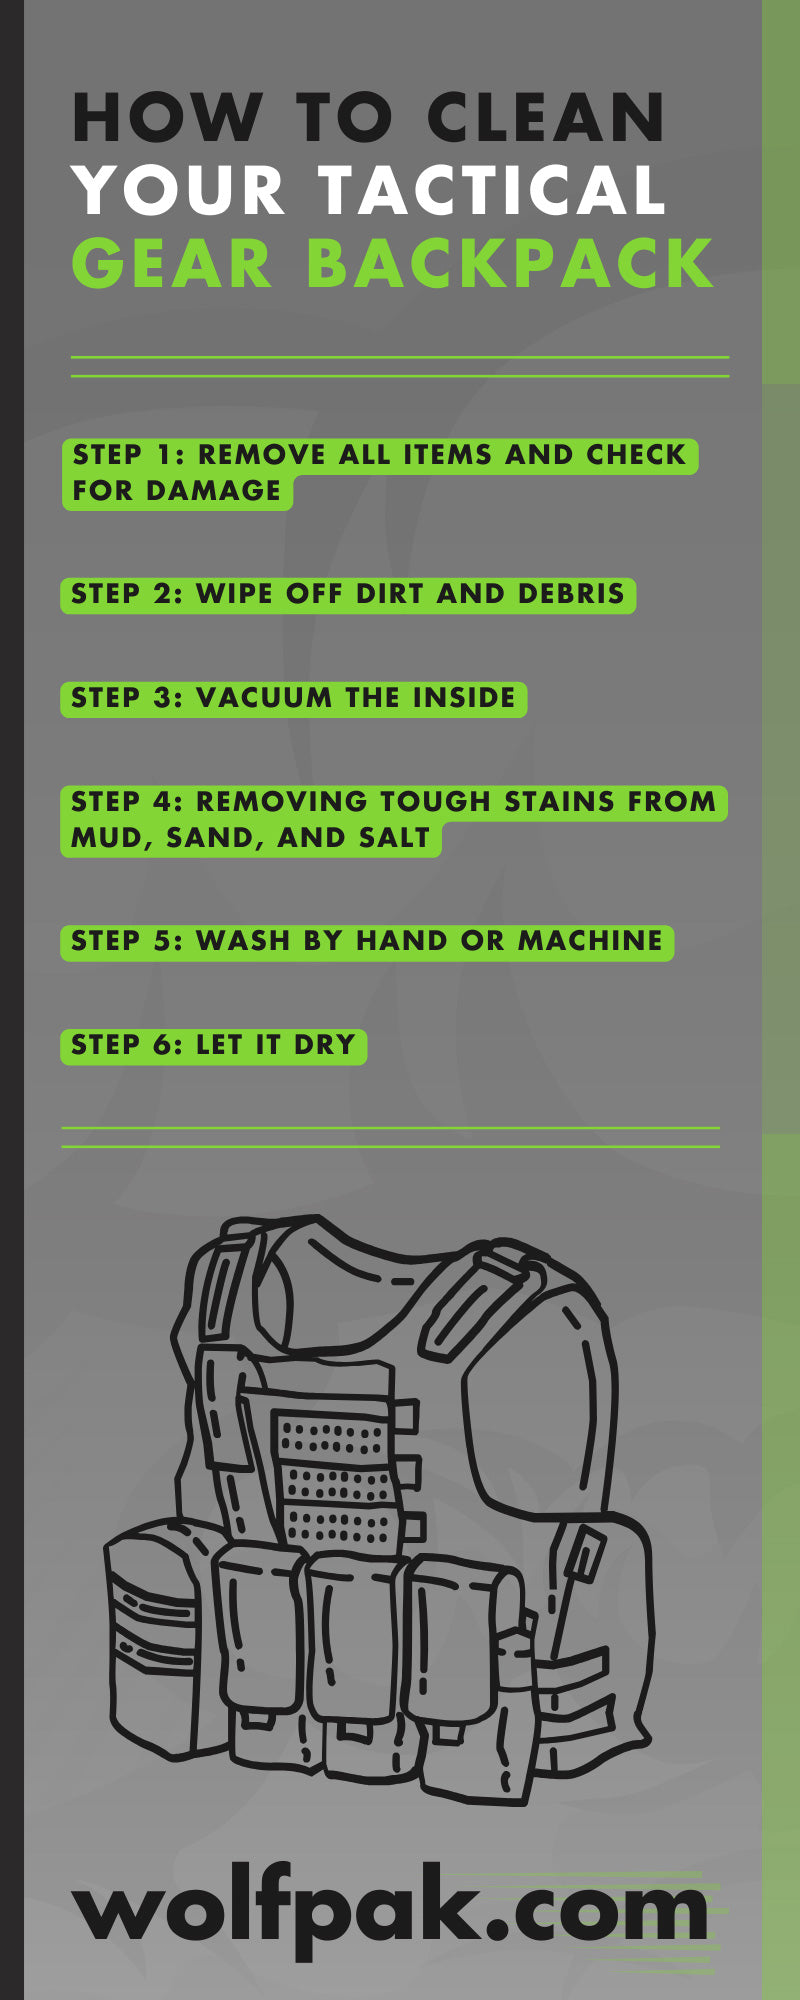 How To Clean Your Tactical Gear Backpack